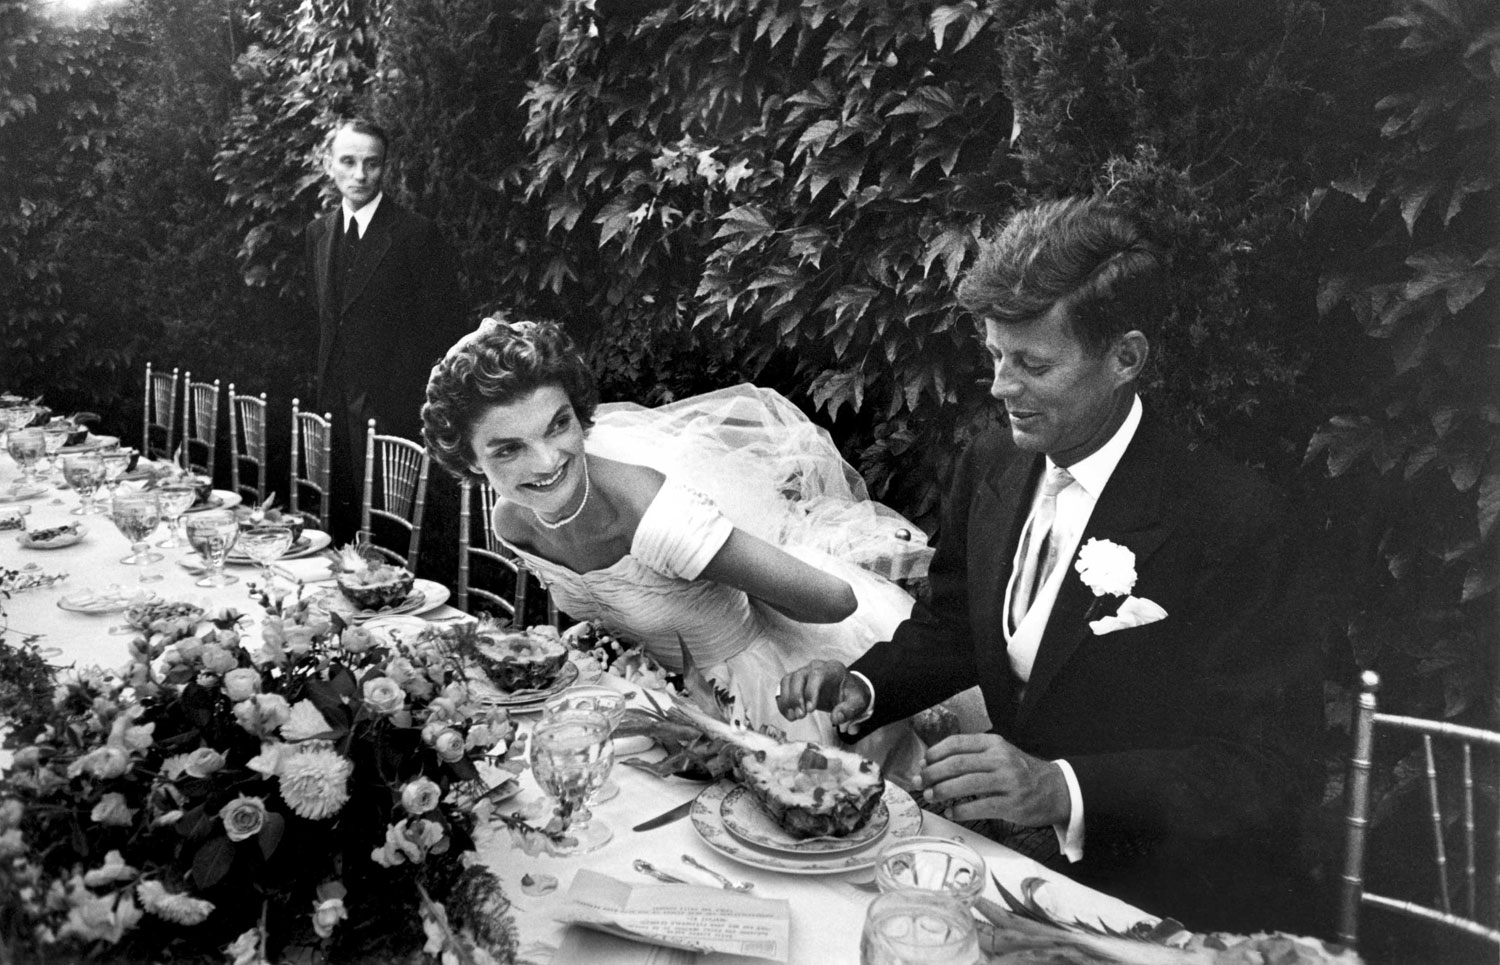 Future First Lady Jacqueline Bouvier Kennedy and Sen. John Kennedy at their wedding reception, 1953.